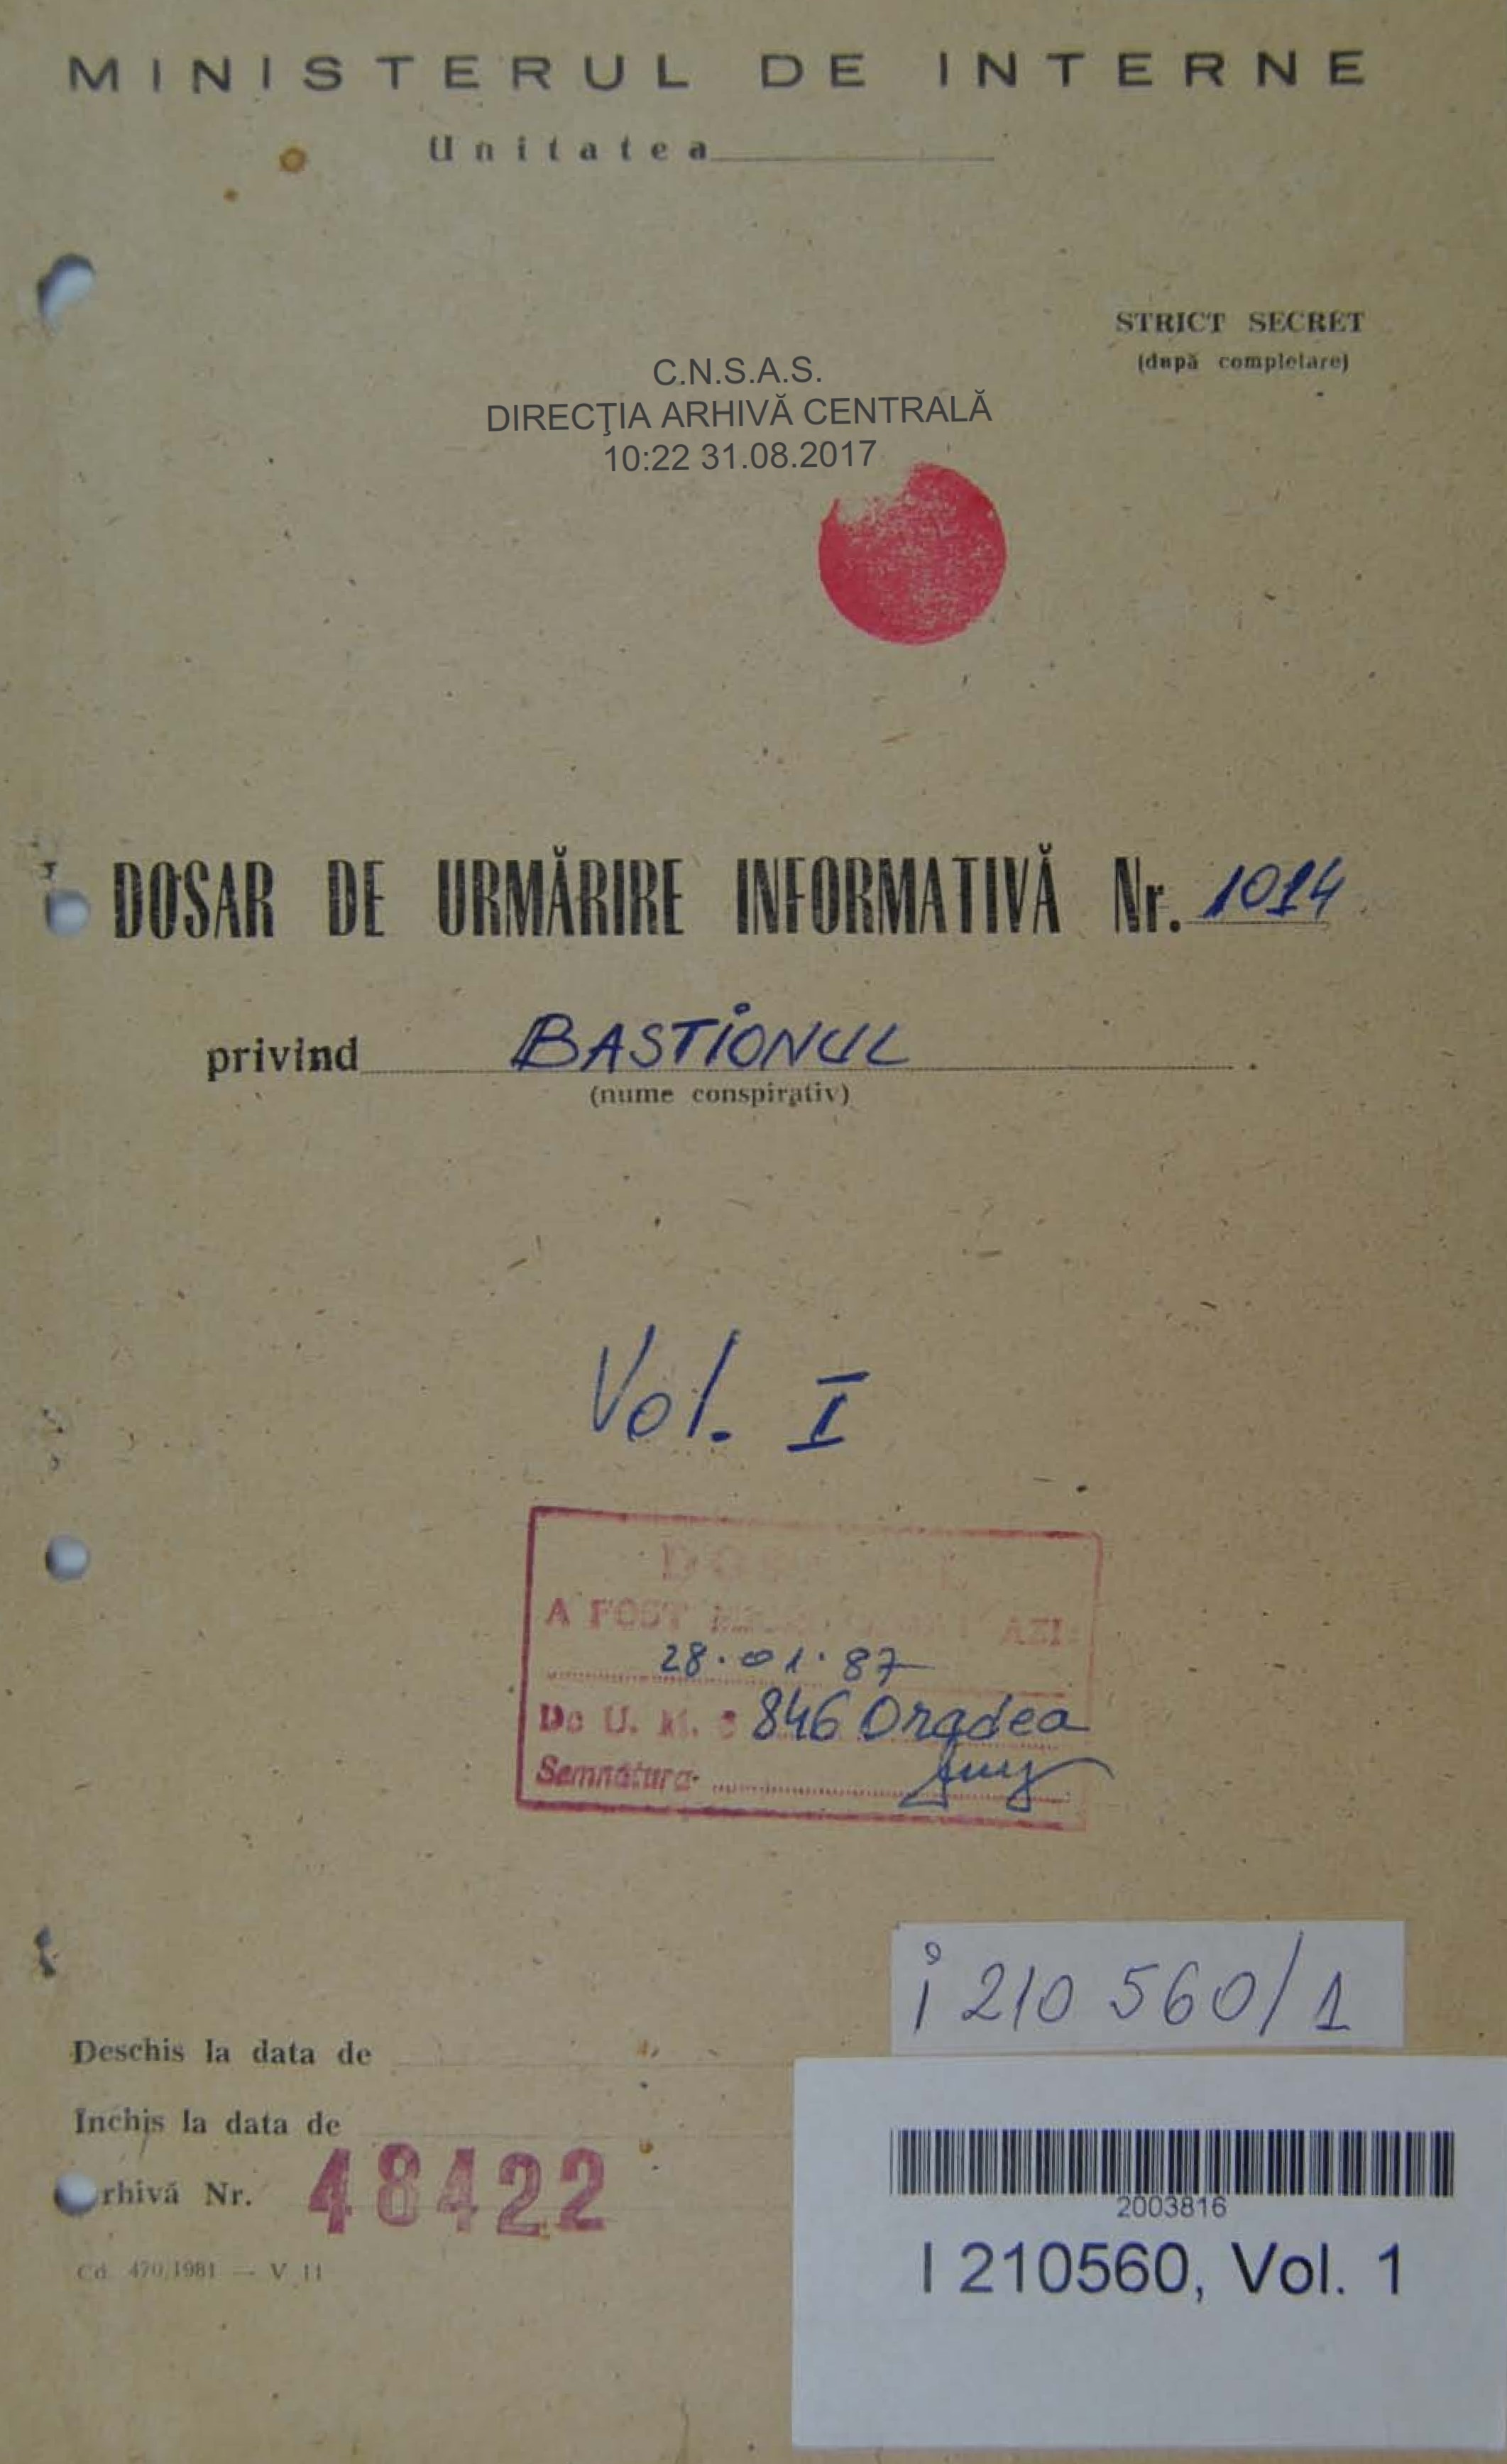 Front cover of the Antal Károly Tóth’s informative surveillance file created by the Securitate